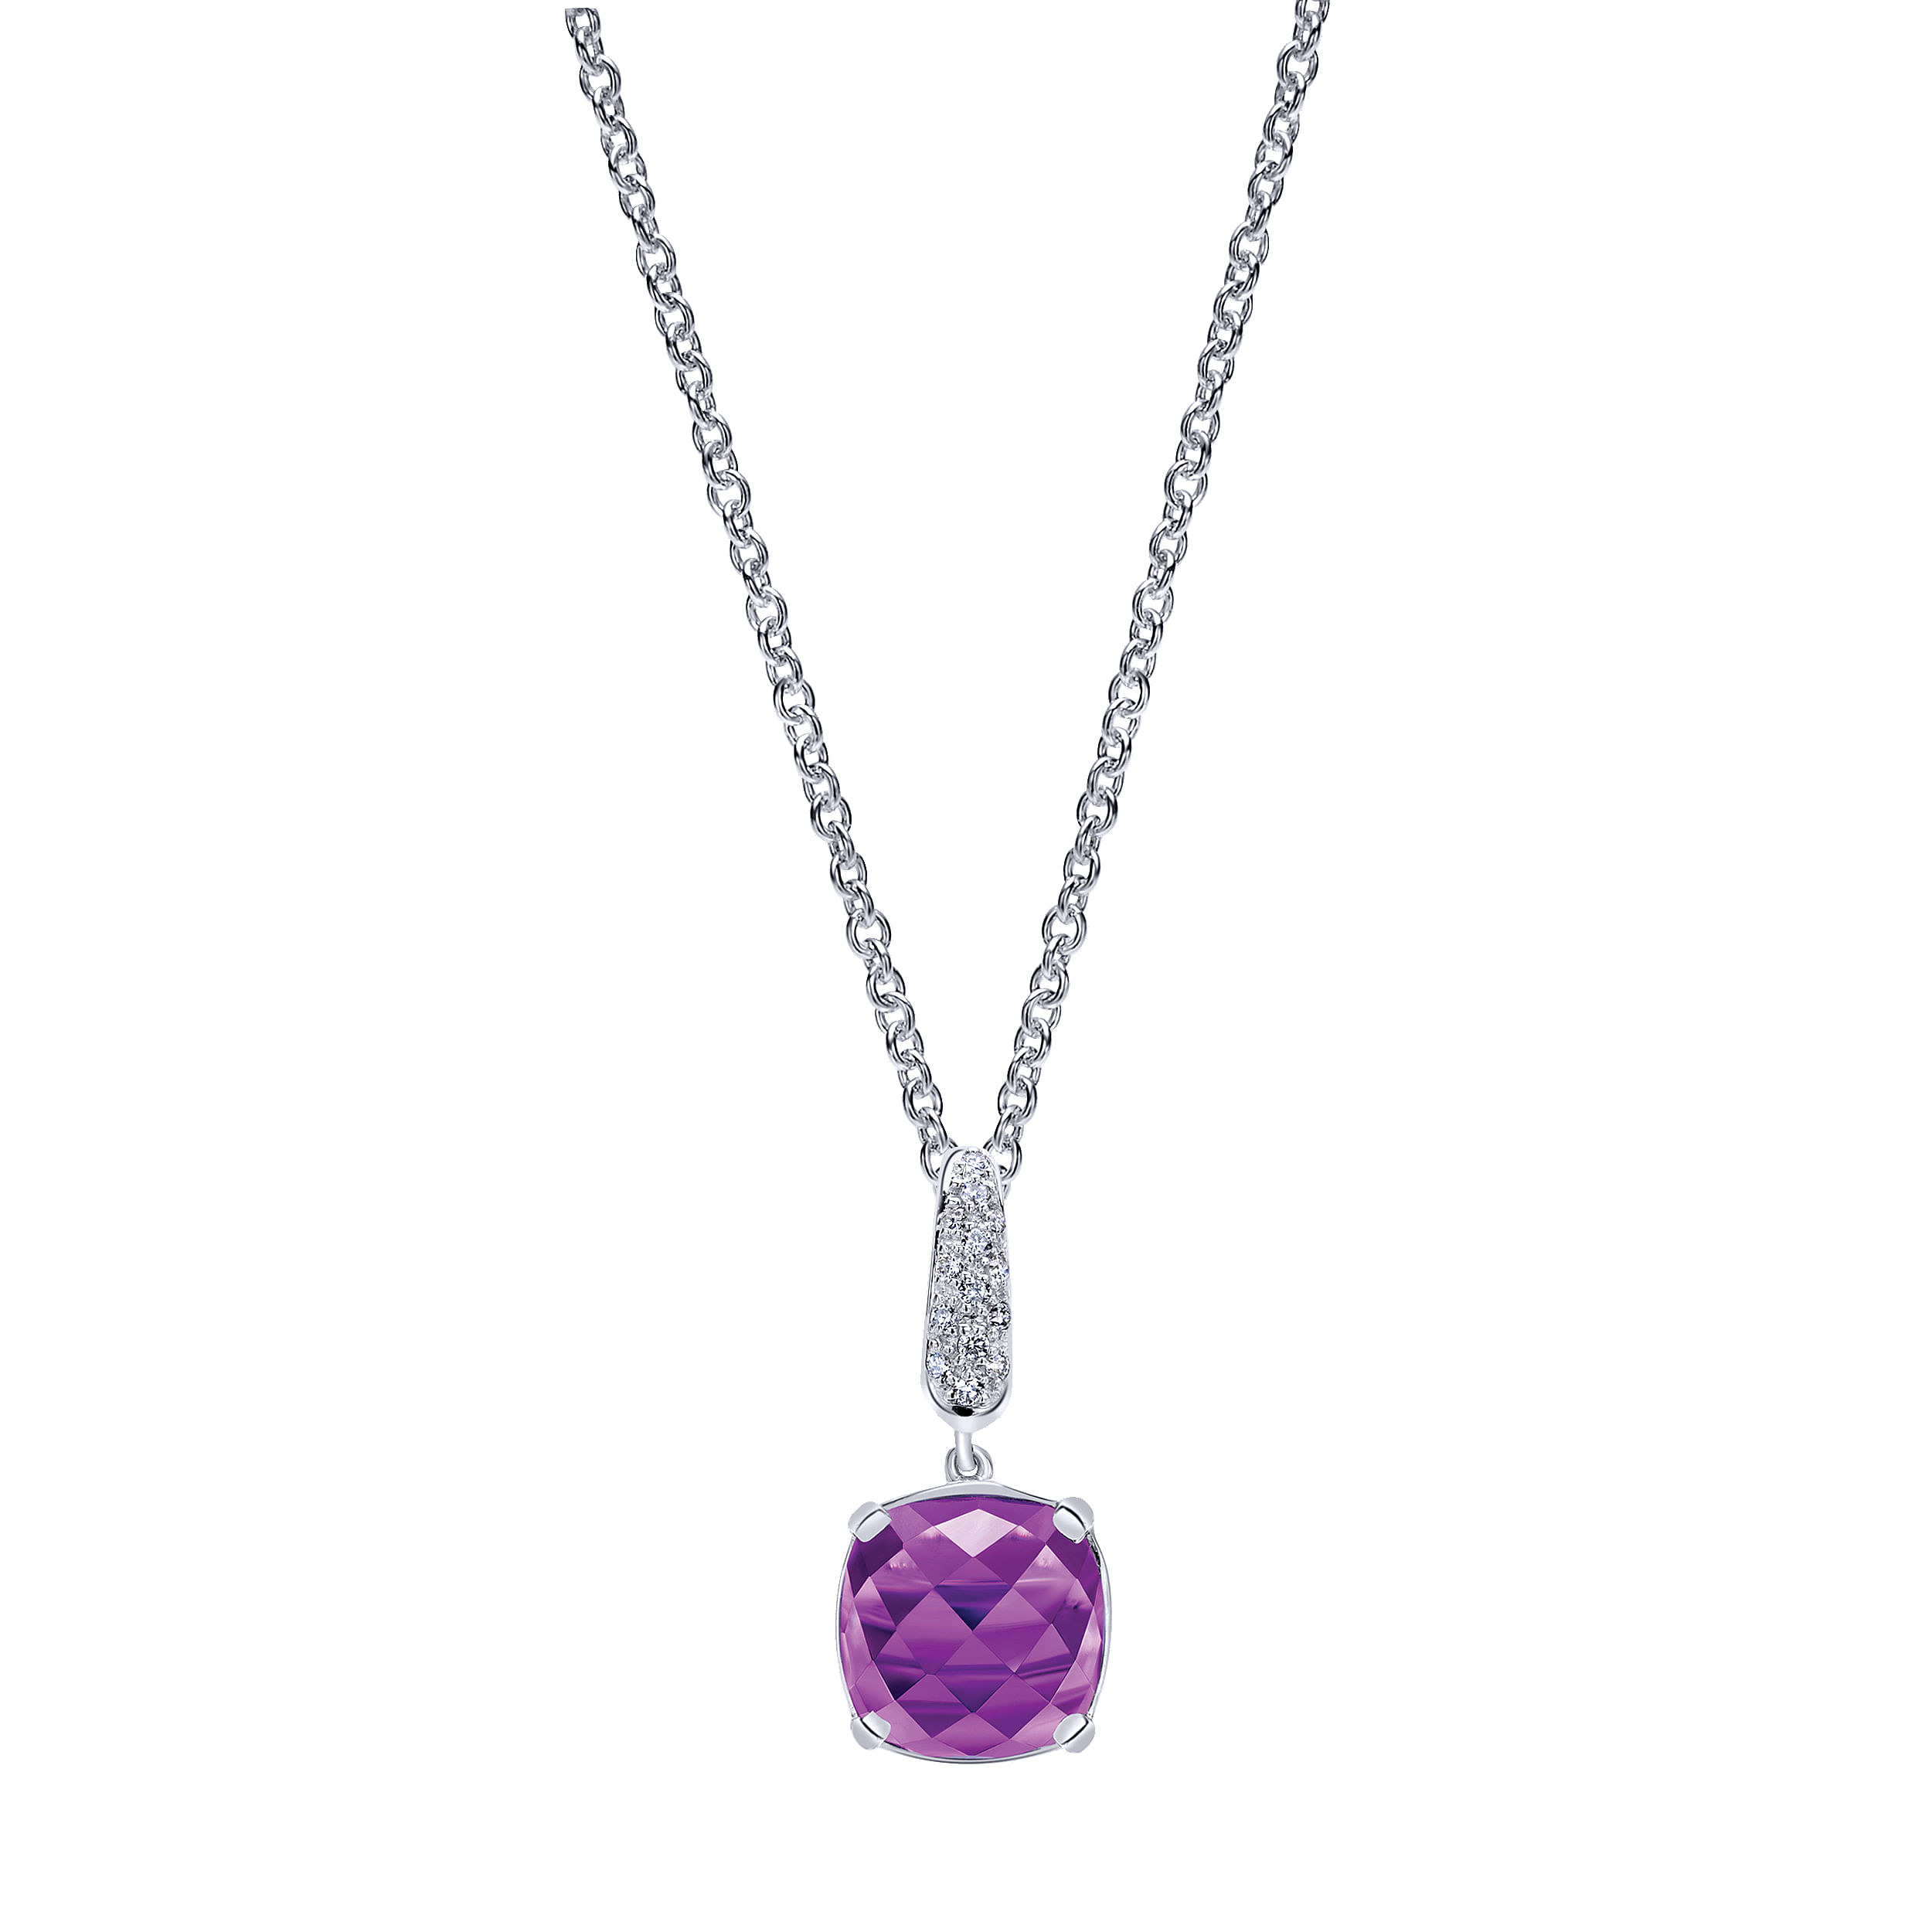 14K White Gold Cushion Cut Amethyst and Diamond Accent Pendant Necklace